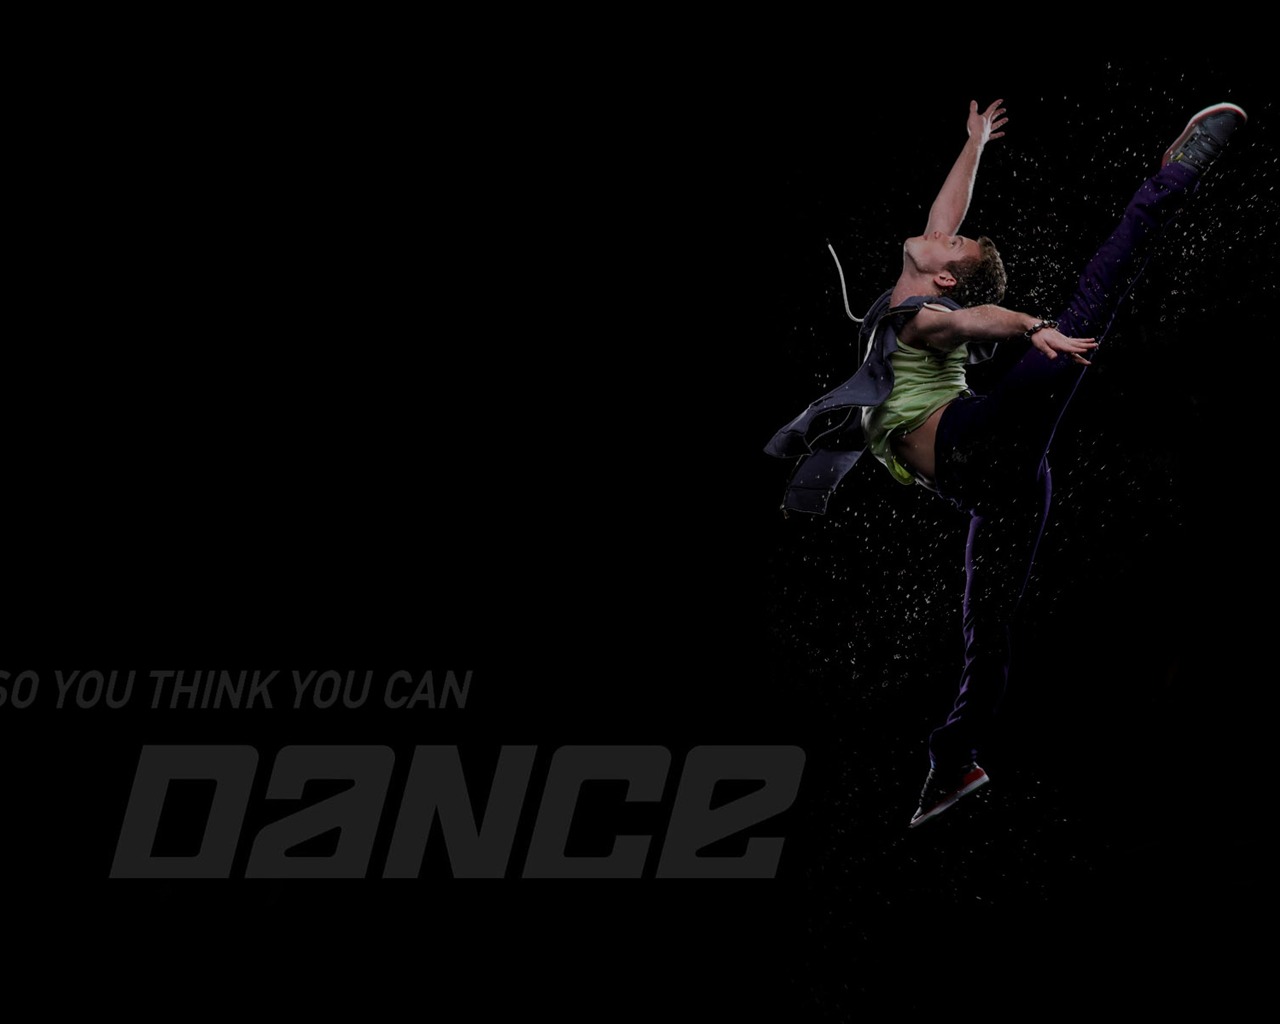 So You Think You Can Dance wallpaper (2) #8 - 1280x1024